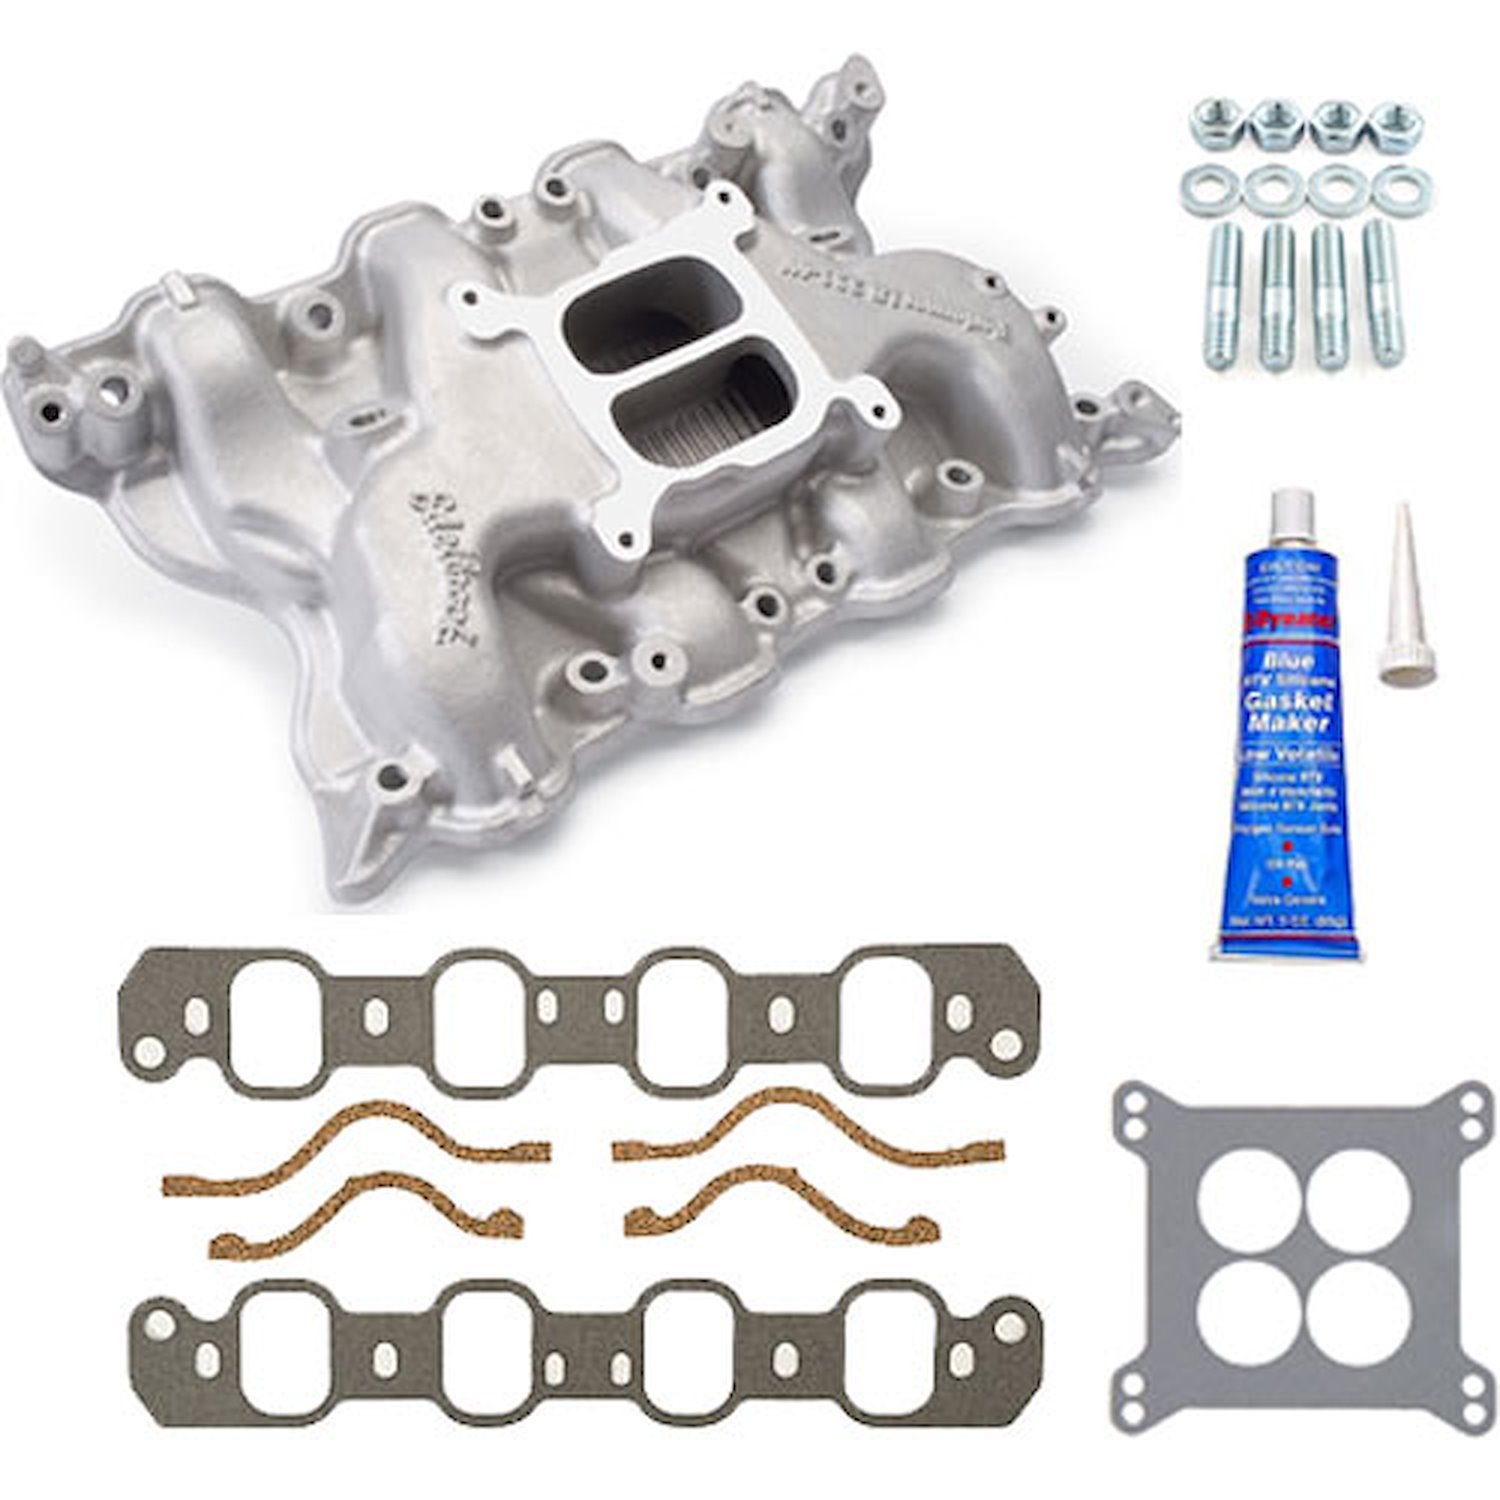 Performer 351-4V Ford 351c Intake Manifold with Installation Kit